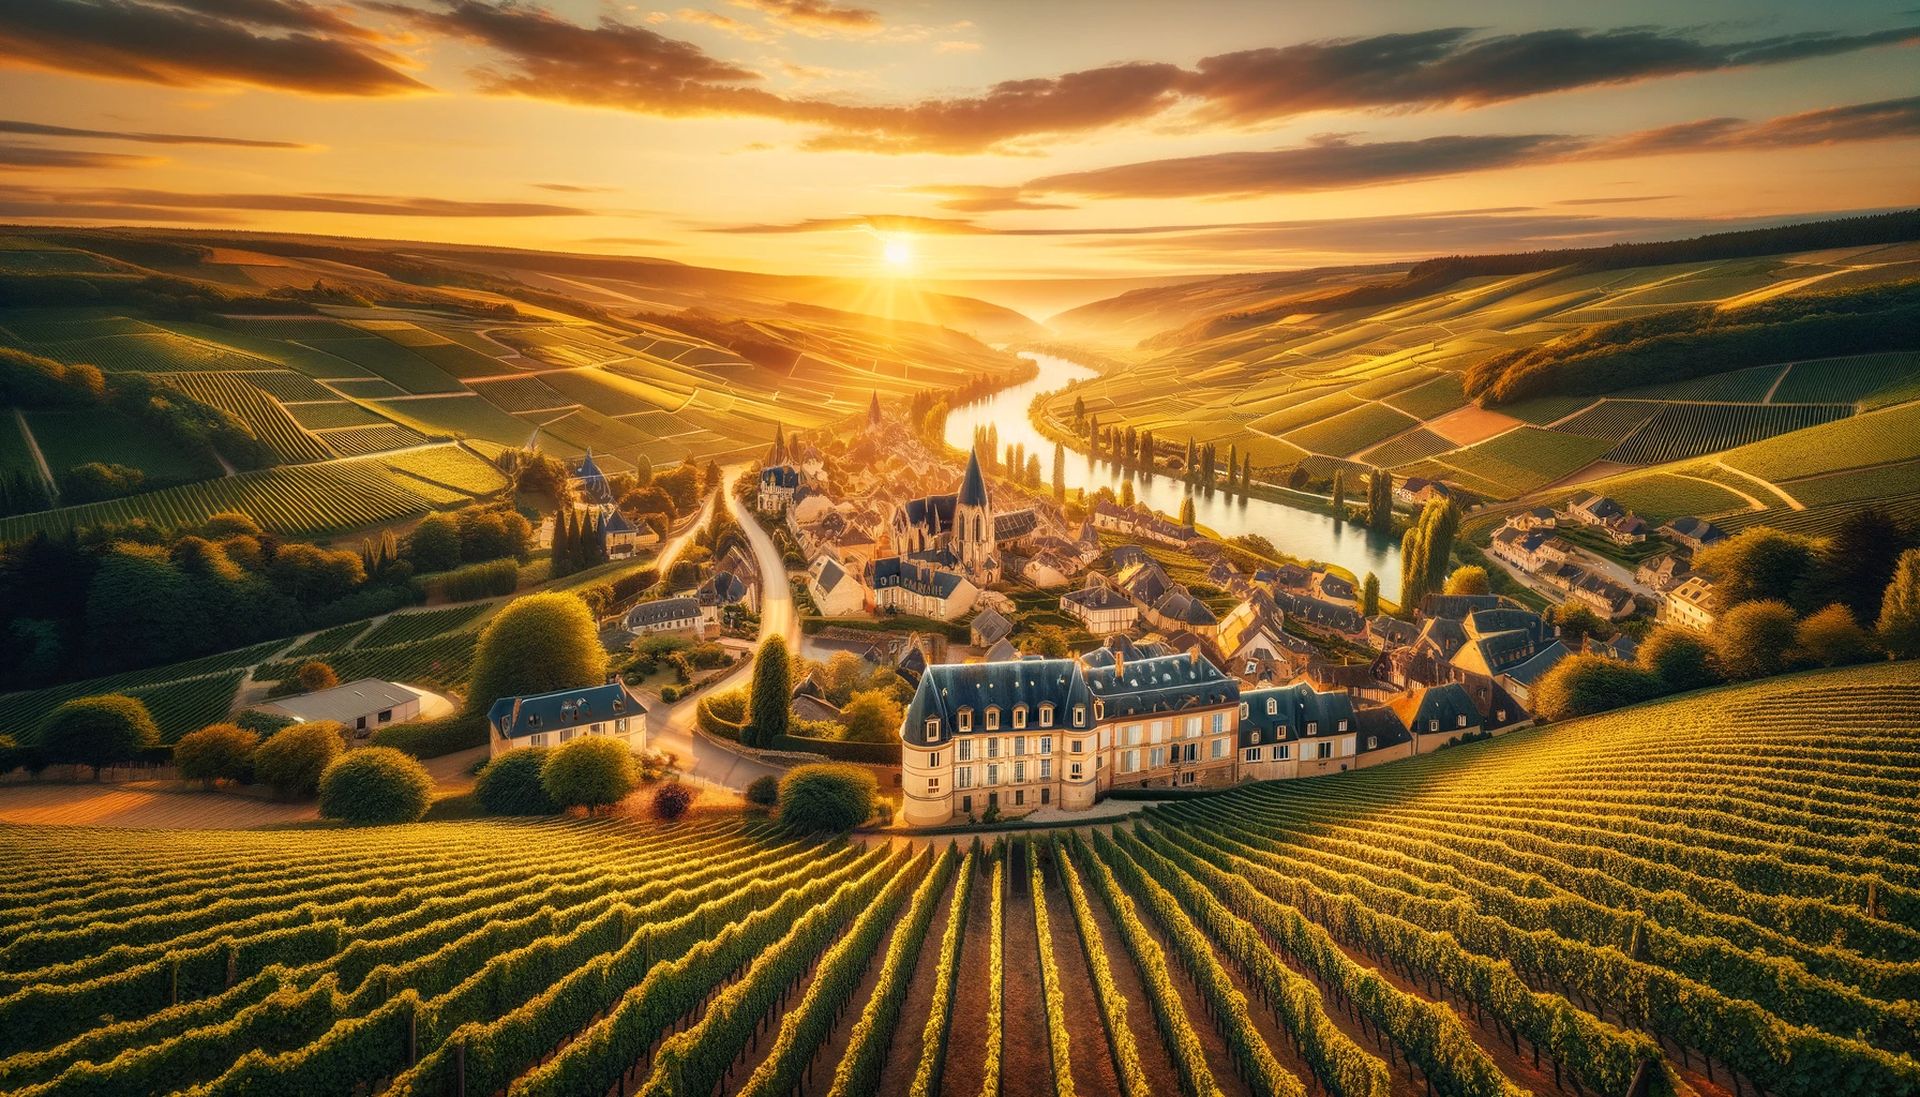 A stunning aerial view of the picturesque Champagne region in France during sunset. The landscape is dotted with lush vineyards, traditional French